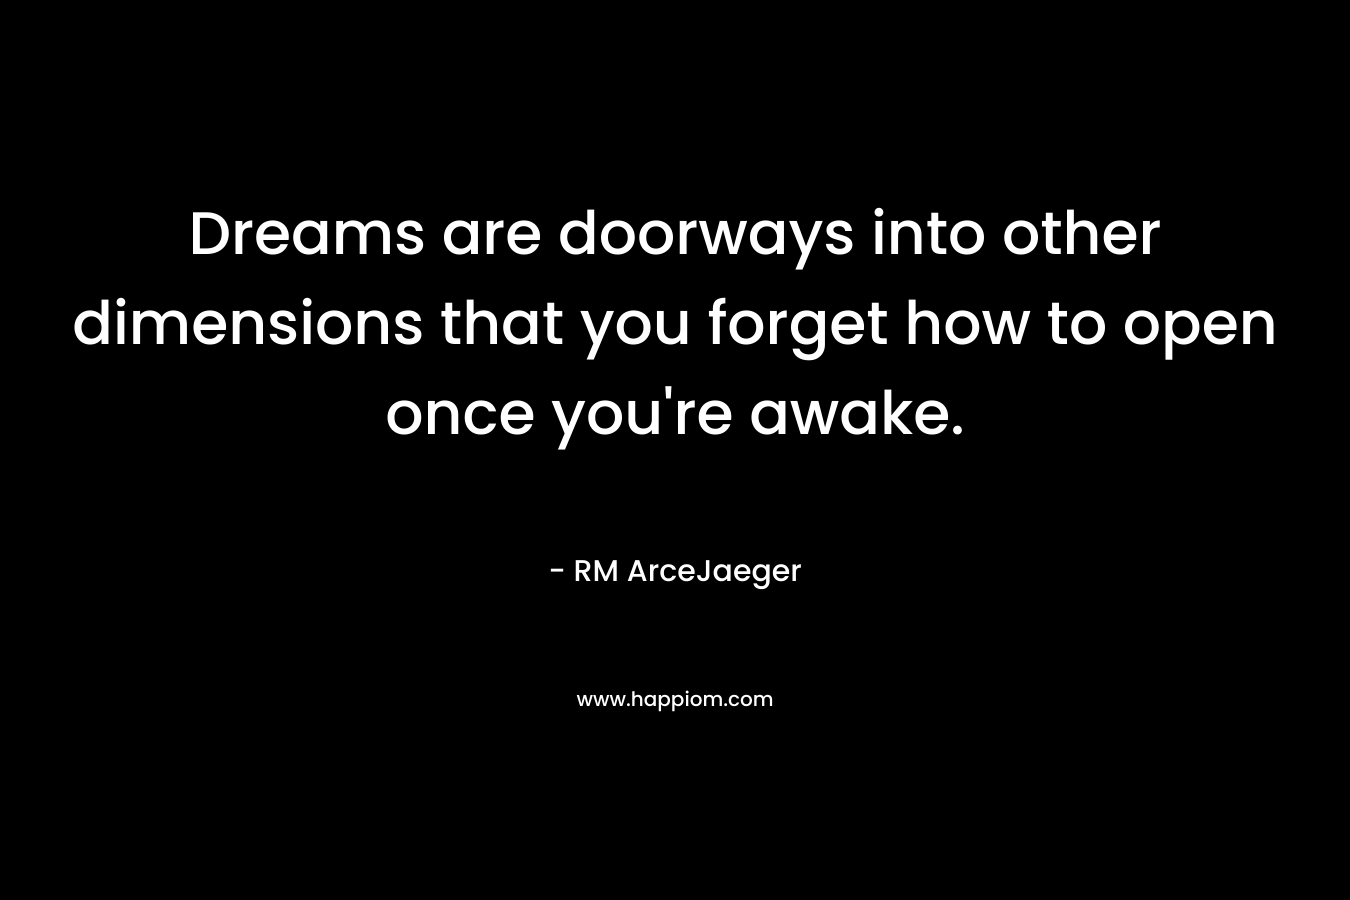 Dreams are doorways into other dimensions that you forget how to open once you're awake.